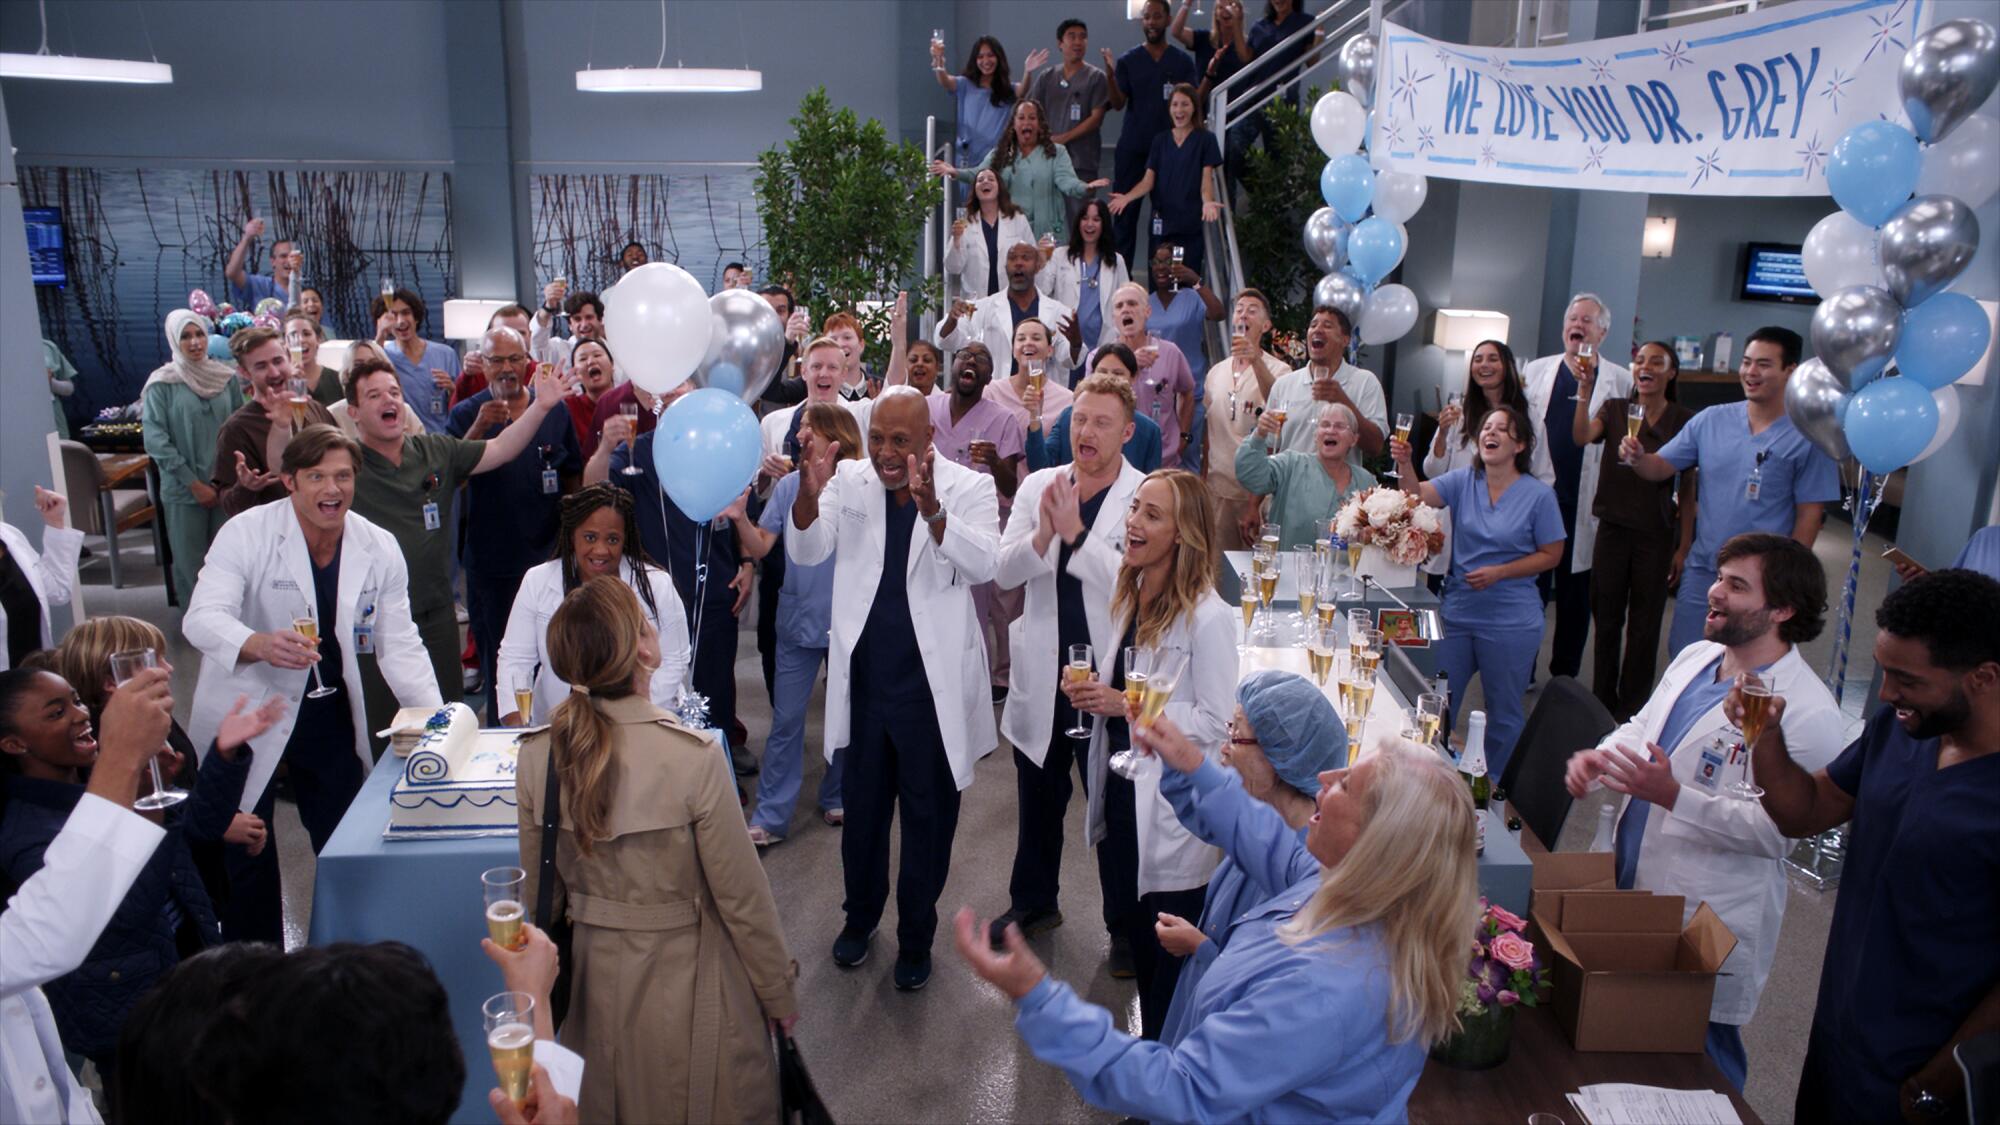 Many doctors and nurses clap at a surprise party at a hospital.